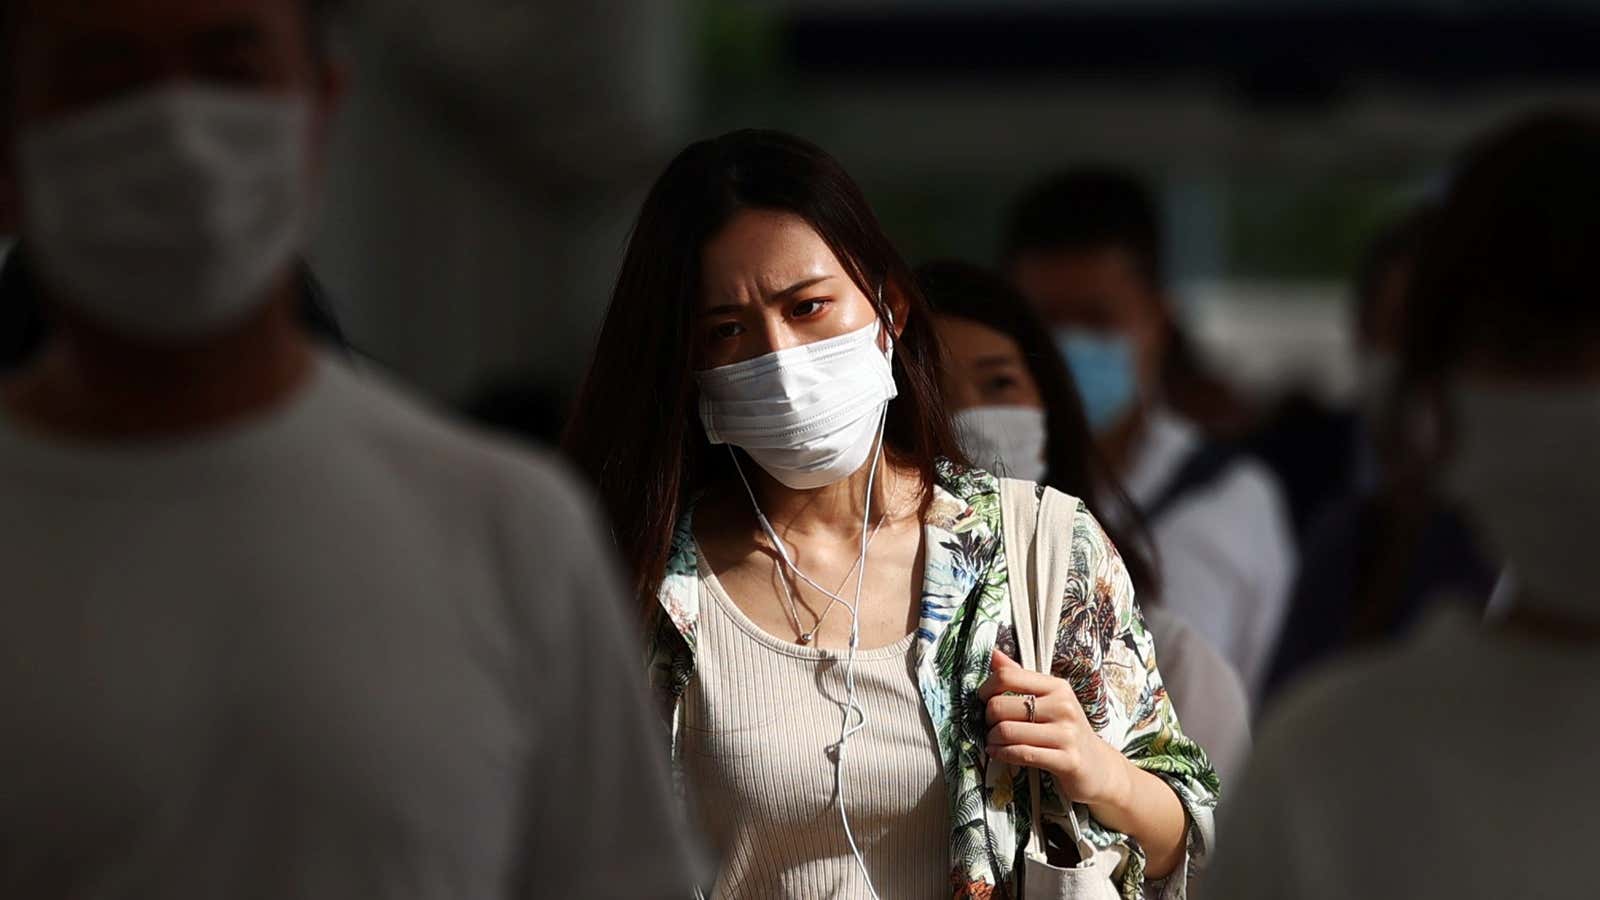 Commuters wearing masks leave a train station during the coronavirus disease (COVID-19) outbreak